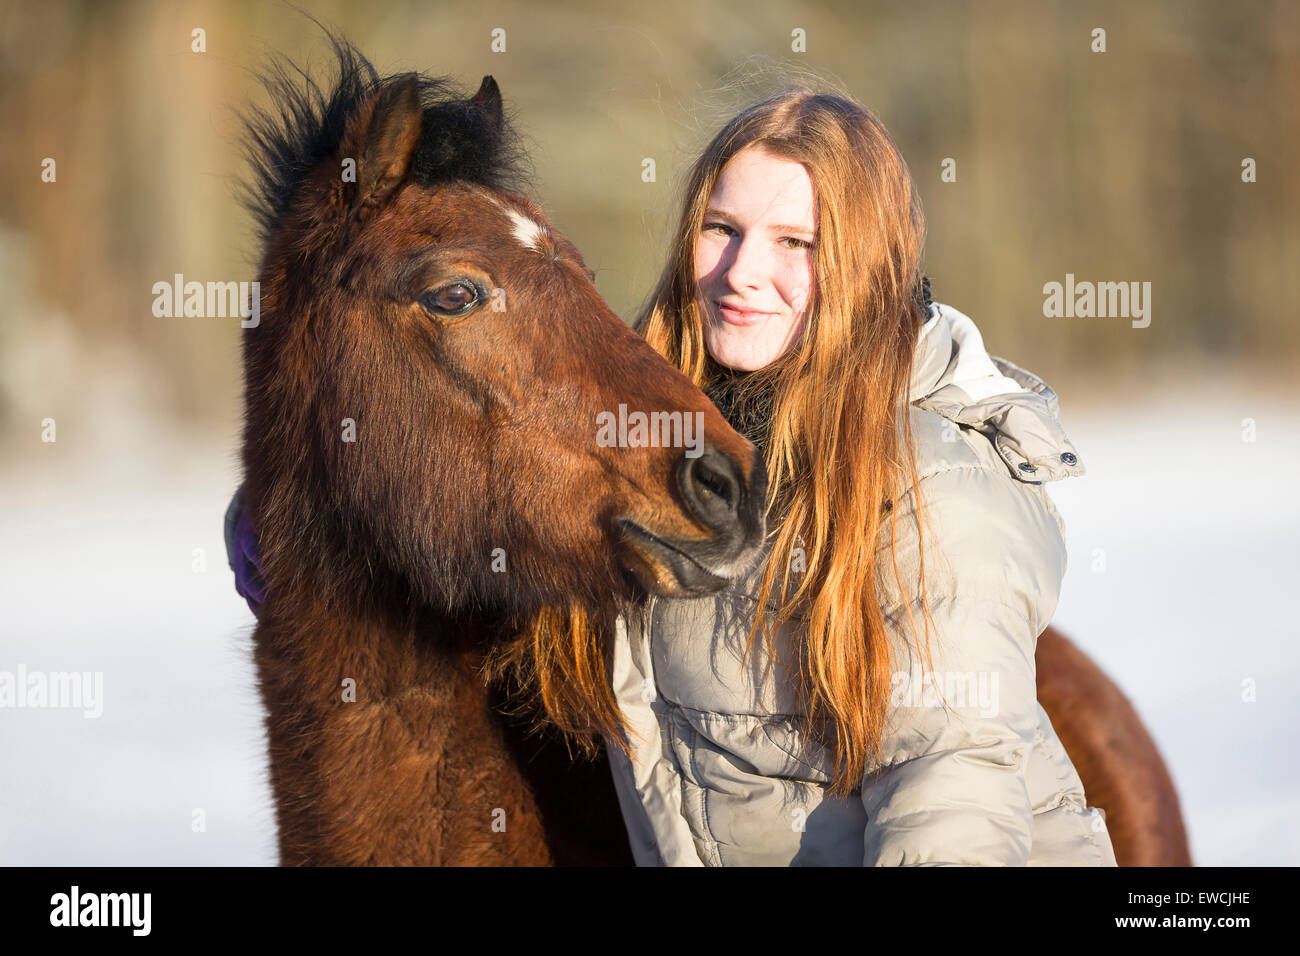 Welsh Pony (Section B). Girl cuddling up to a bay horse on a snowy pasture. Germany Stock Photo